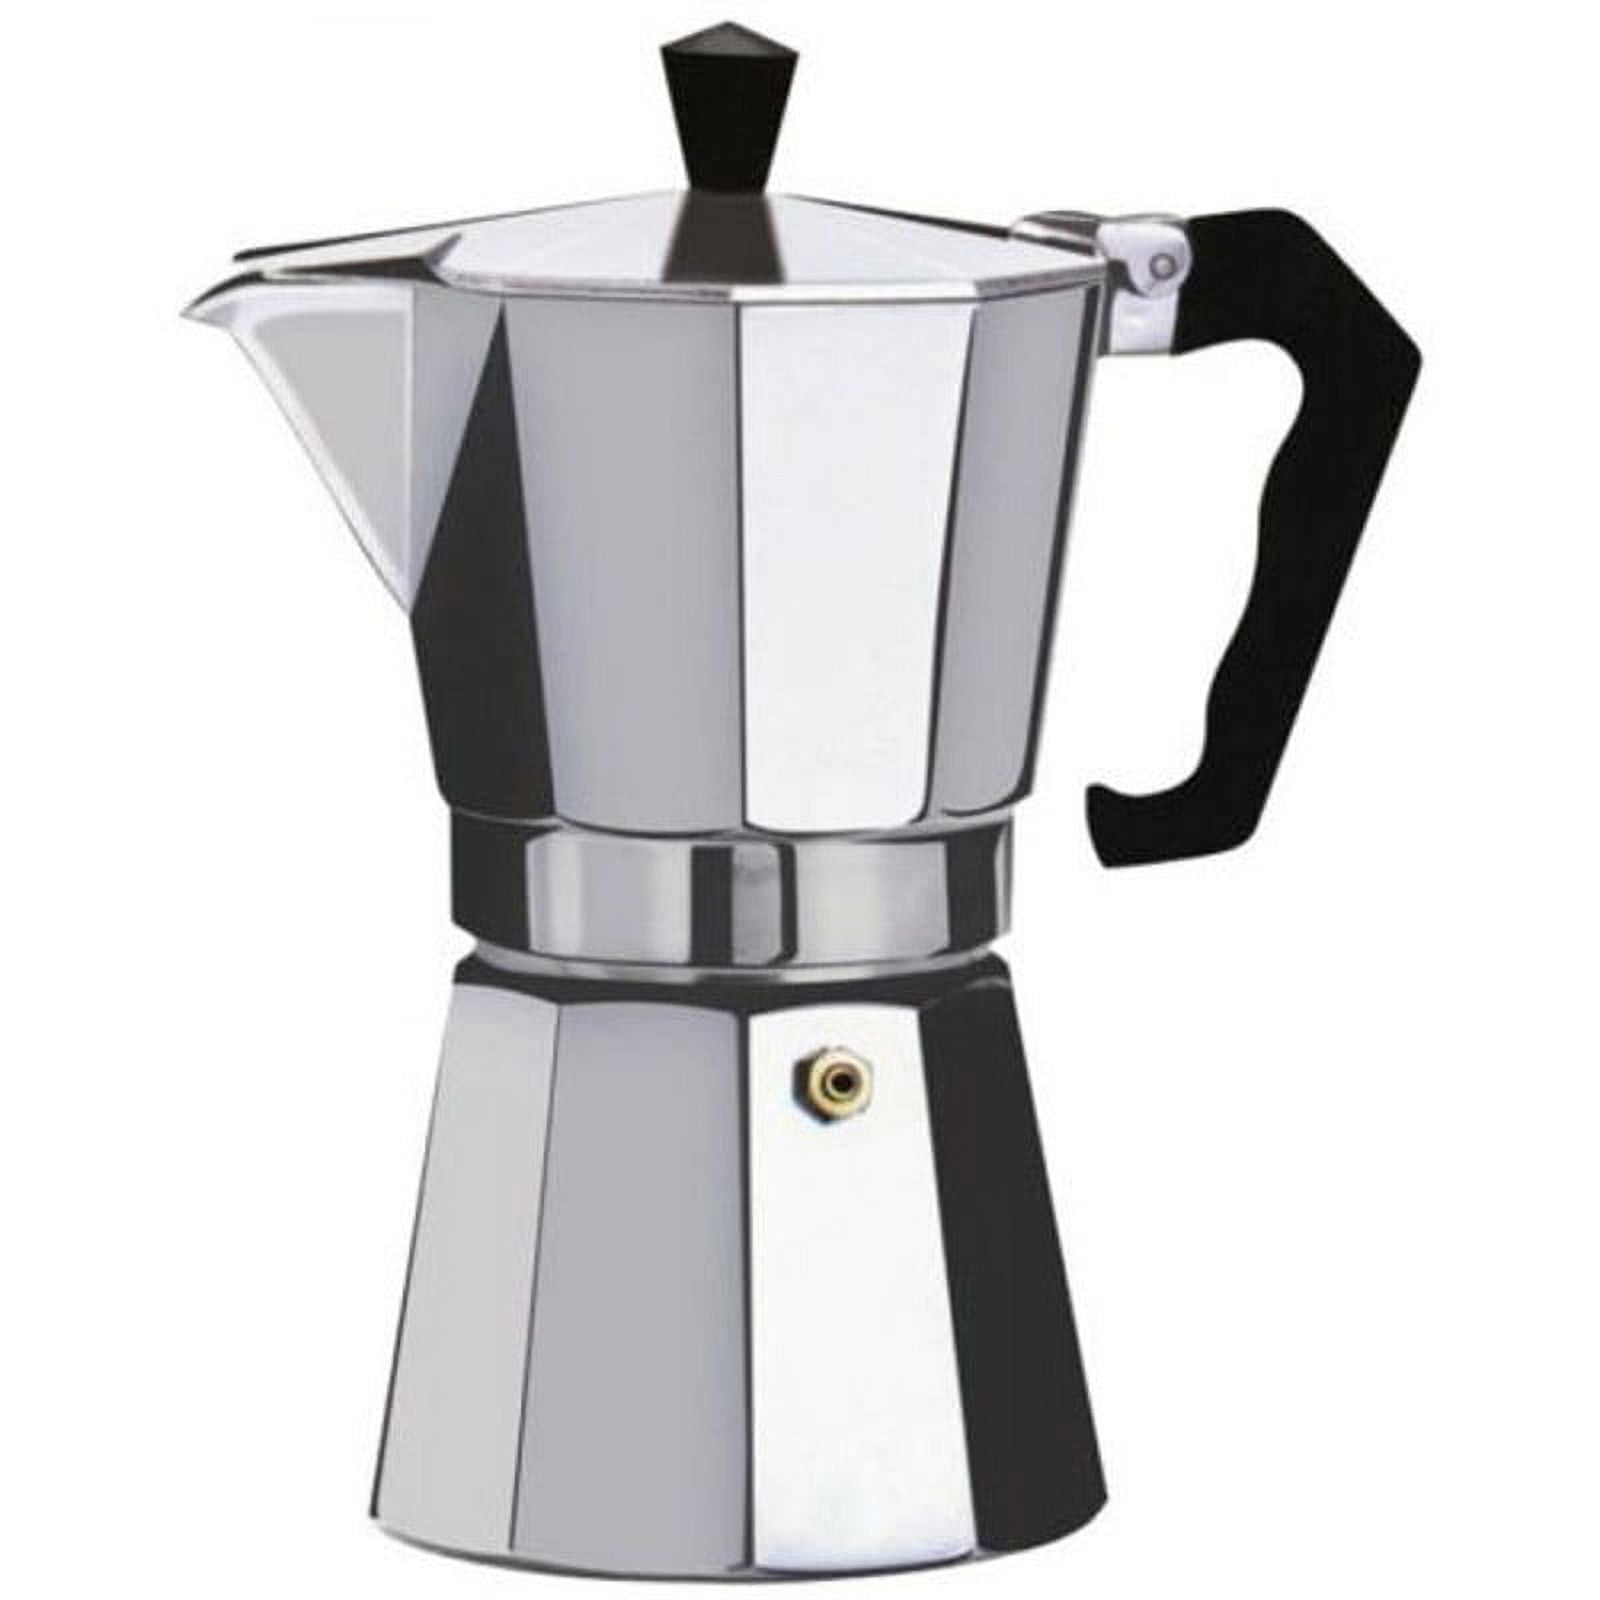 Buy Wholesale China 2021 Greca Cafetera Portatil Aluminum Cafetera Coffee  Maker Coffee Percolator With Metallic Painting & Coffee Maker at USD 2